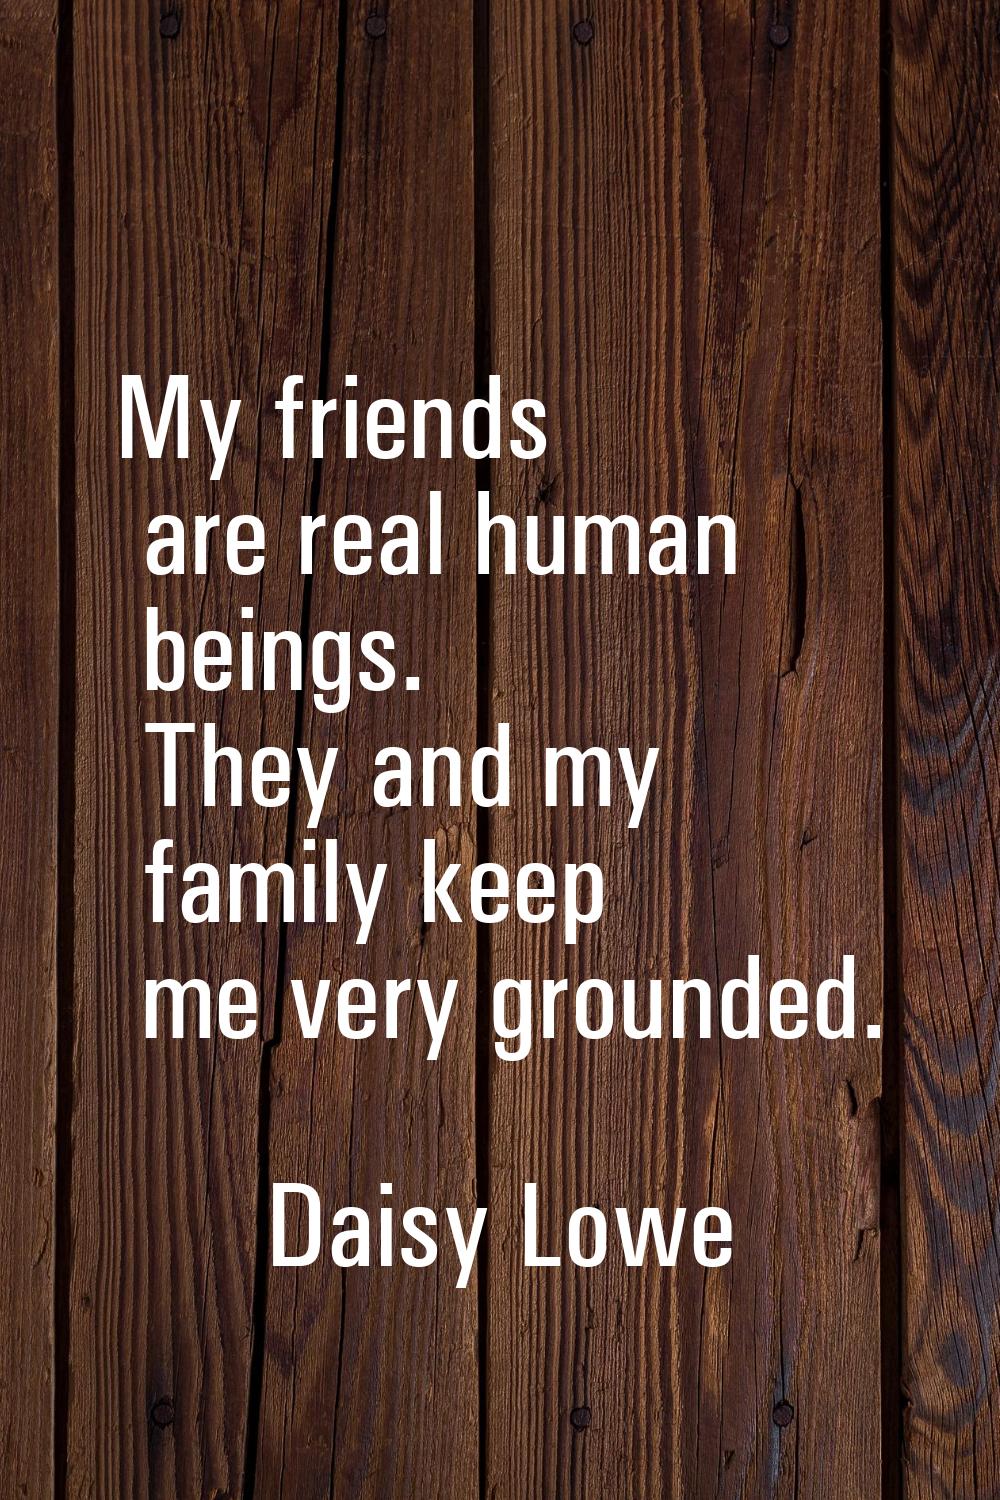 My friends are real human beings. They and my family keep me very grounded.